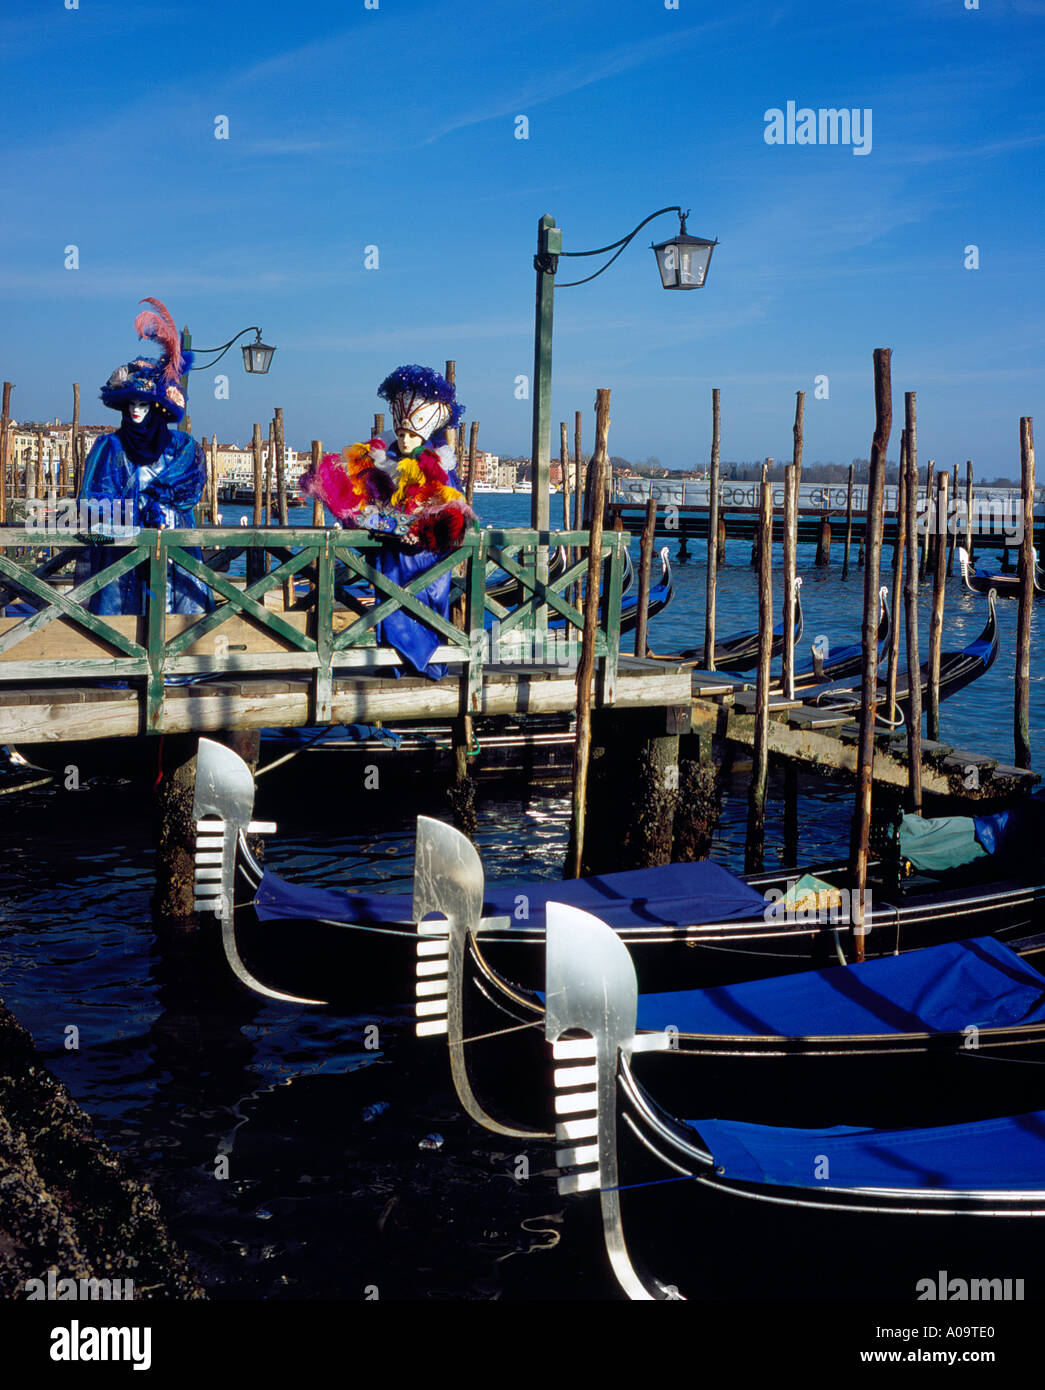 carnival in Venice, UNESCO World Heritage Site, Italy, Europe. Photo by Willy Matheisl Stock Photo